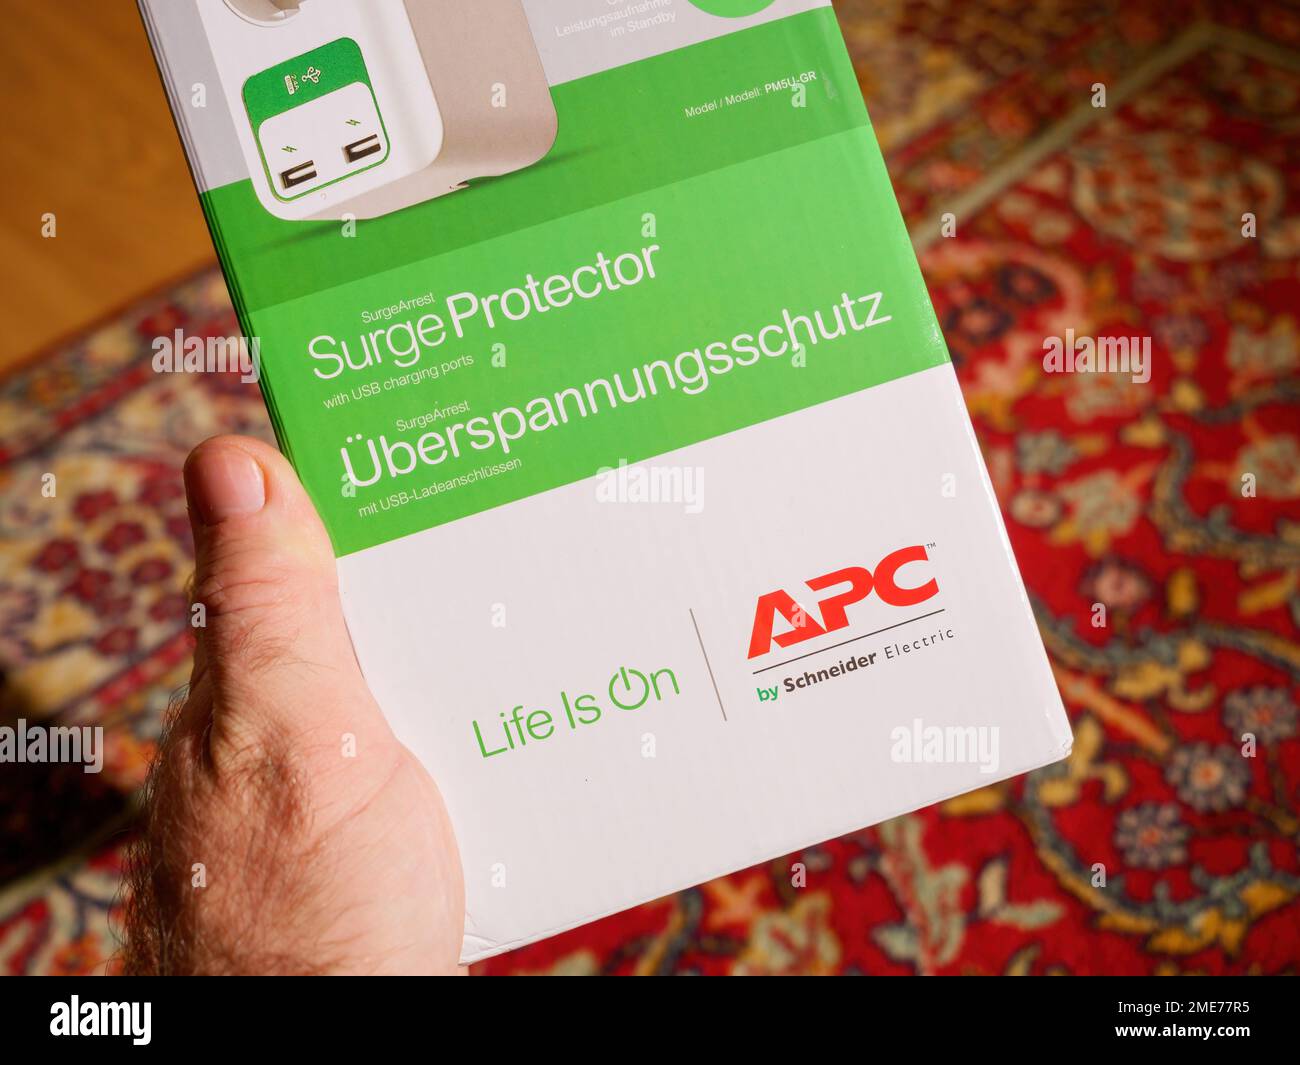 Frankfurt, Germany - Dec 2, 2022: POV male customer hand holding APC American Power Conversion Corporation by Schneider Electric cardboard package with Life is on slogan Stock Photo